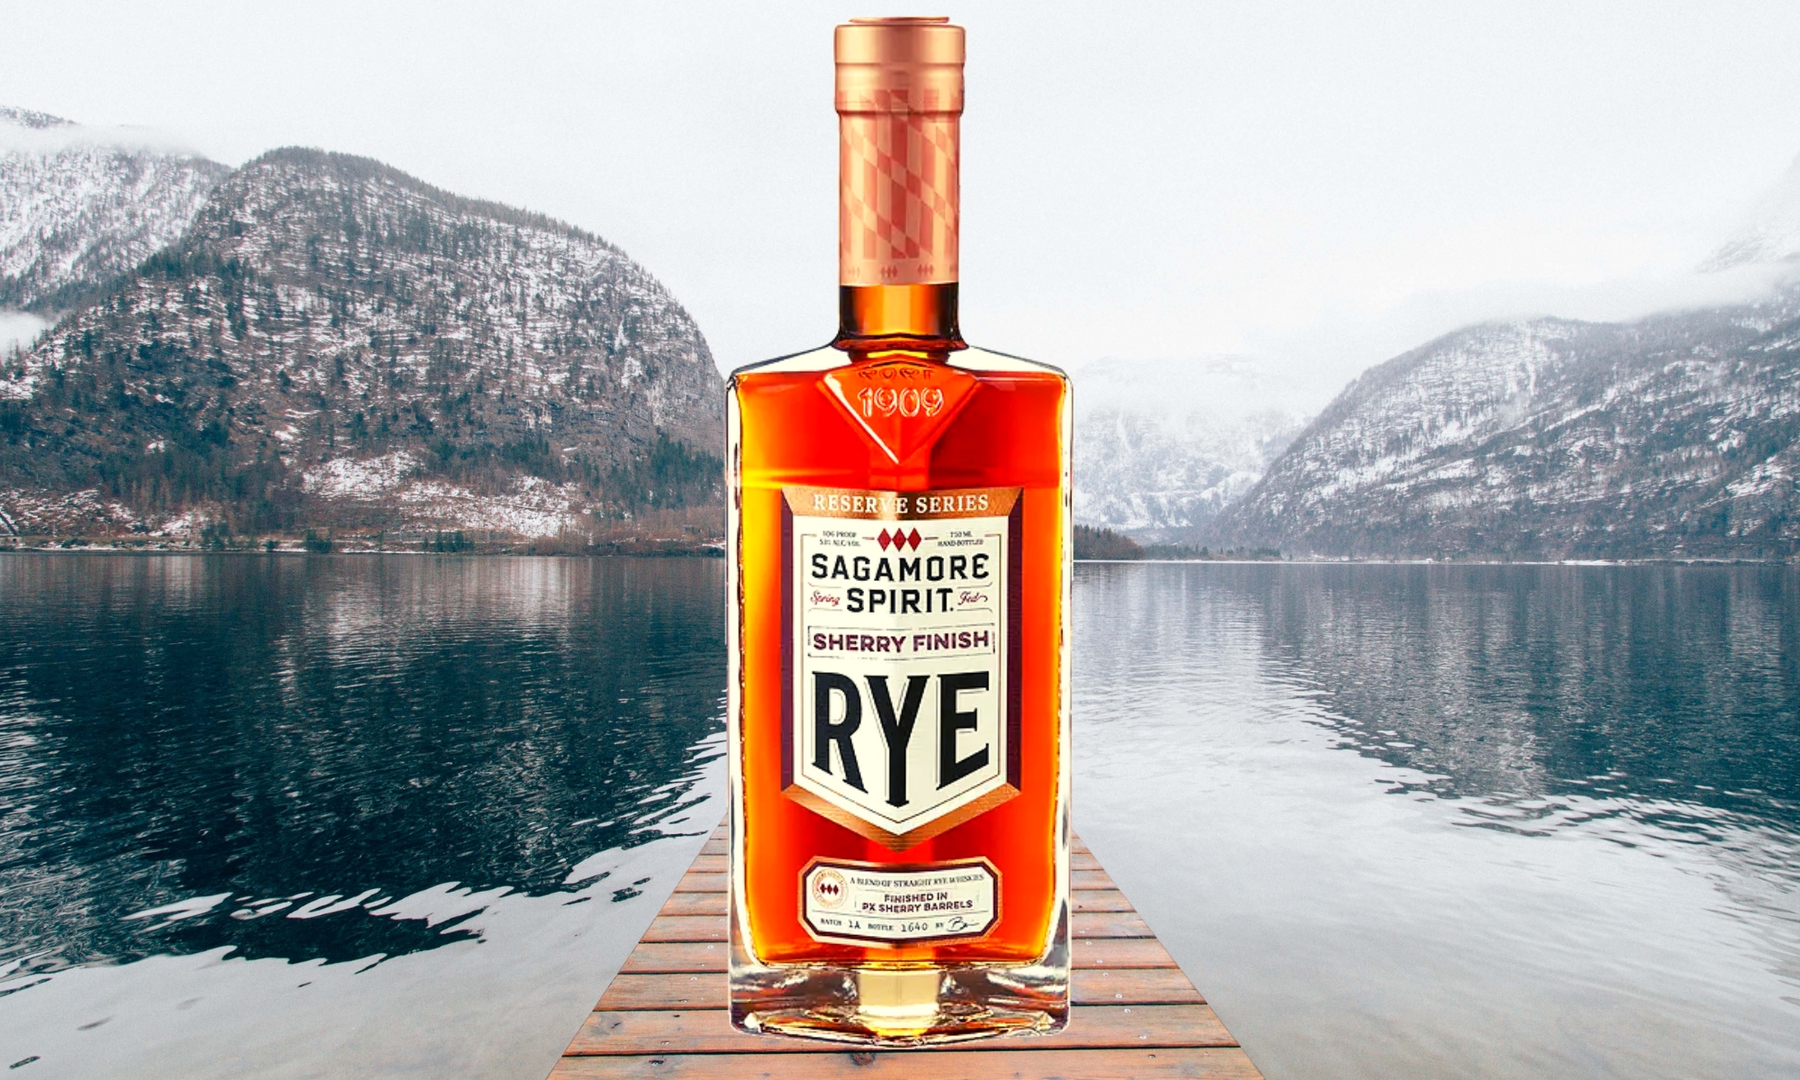 Introducing A New Tipxy Craft Brand: Sagamore Spirit